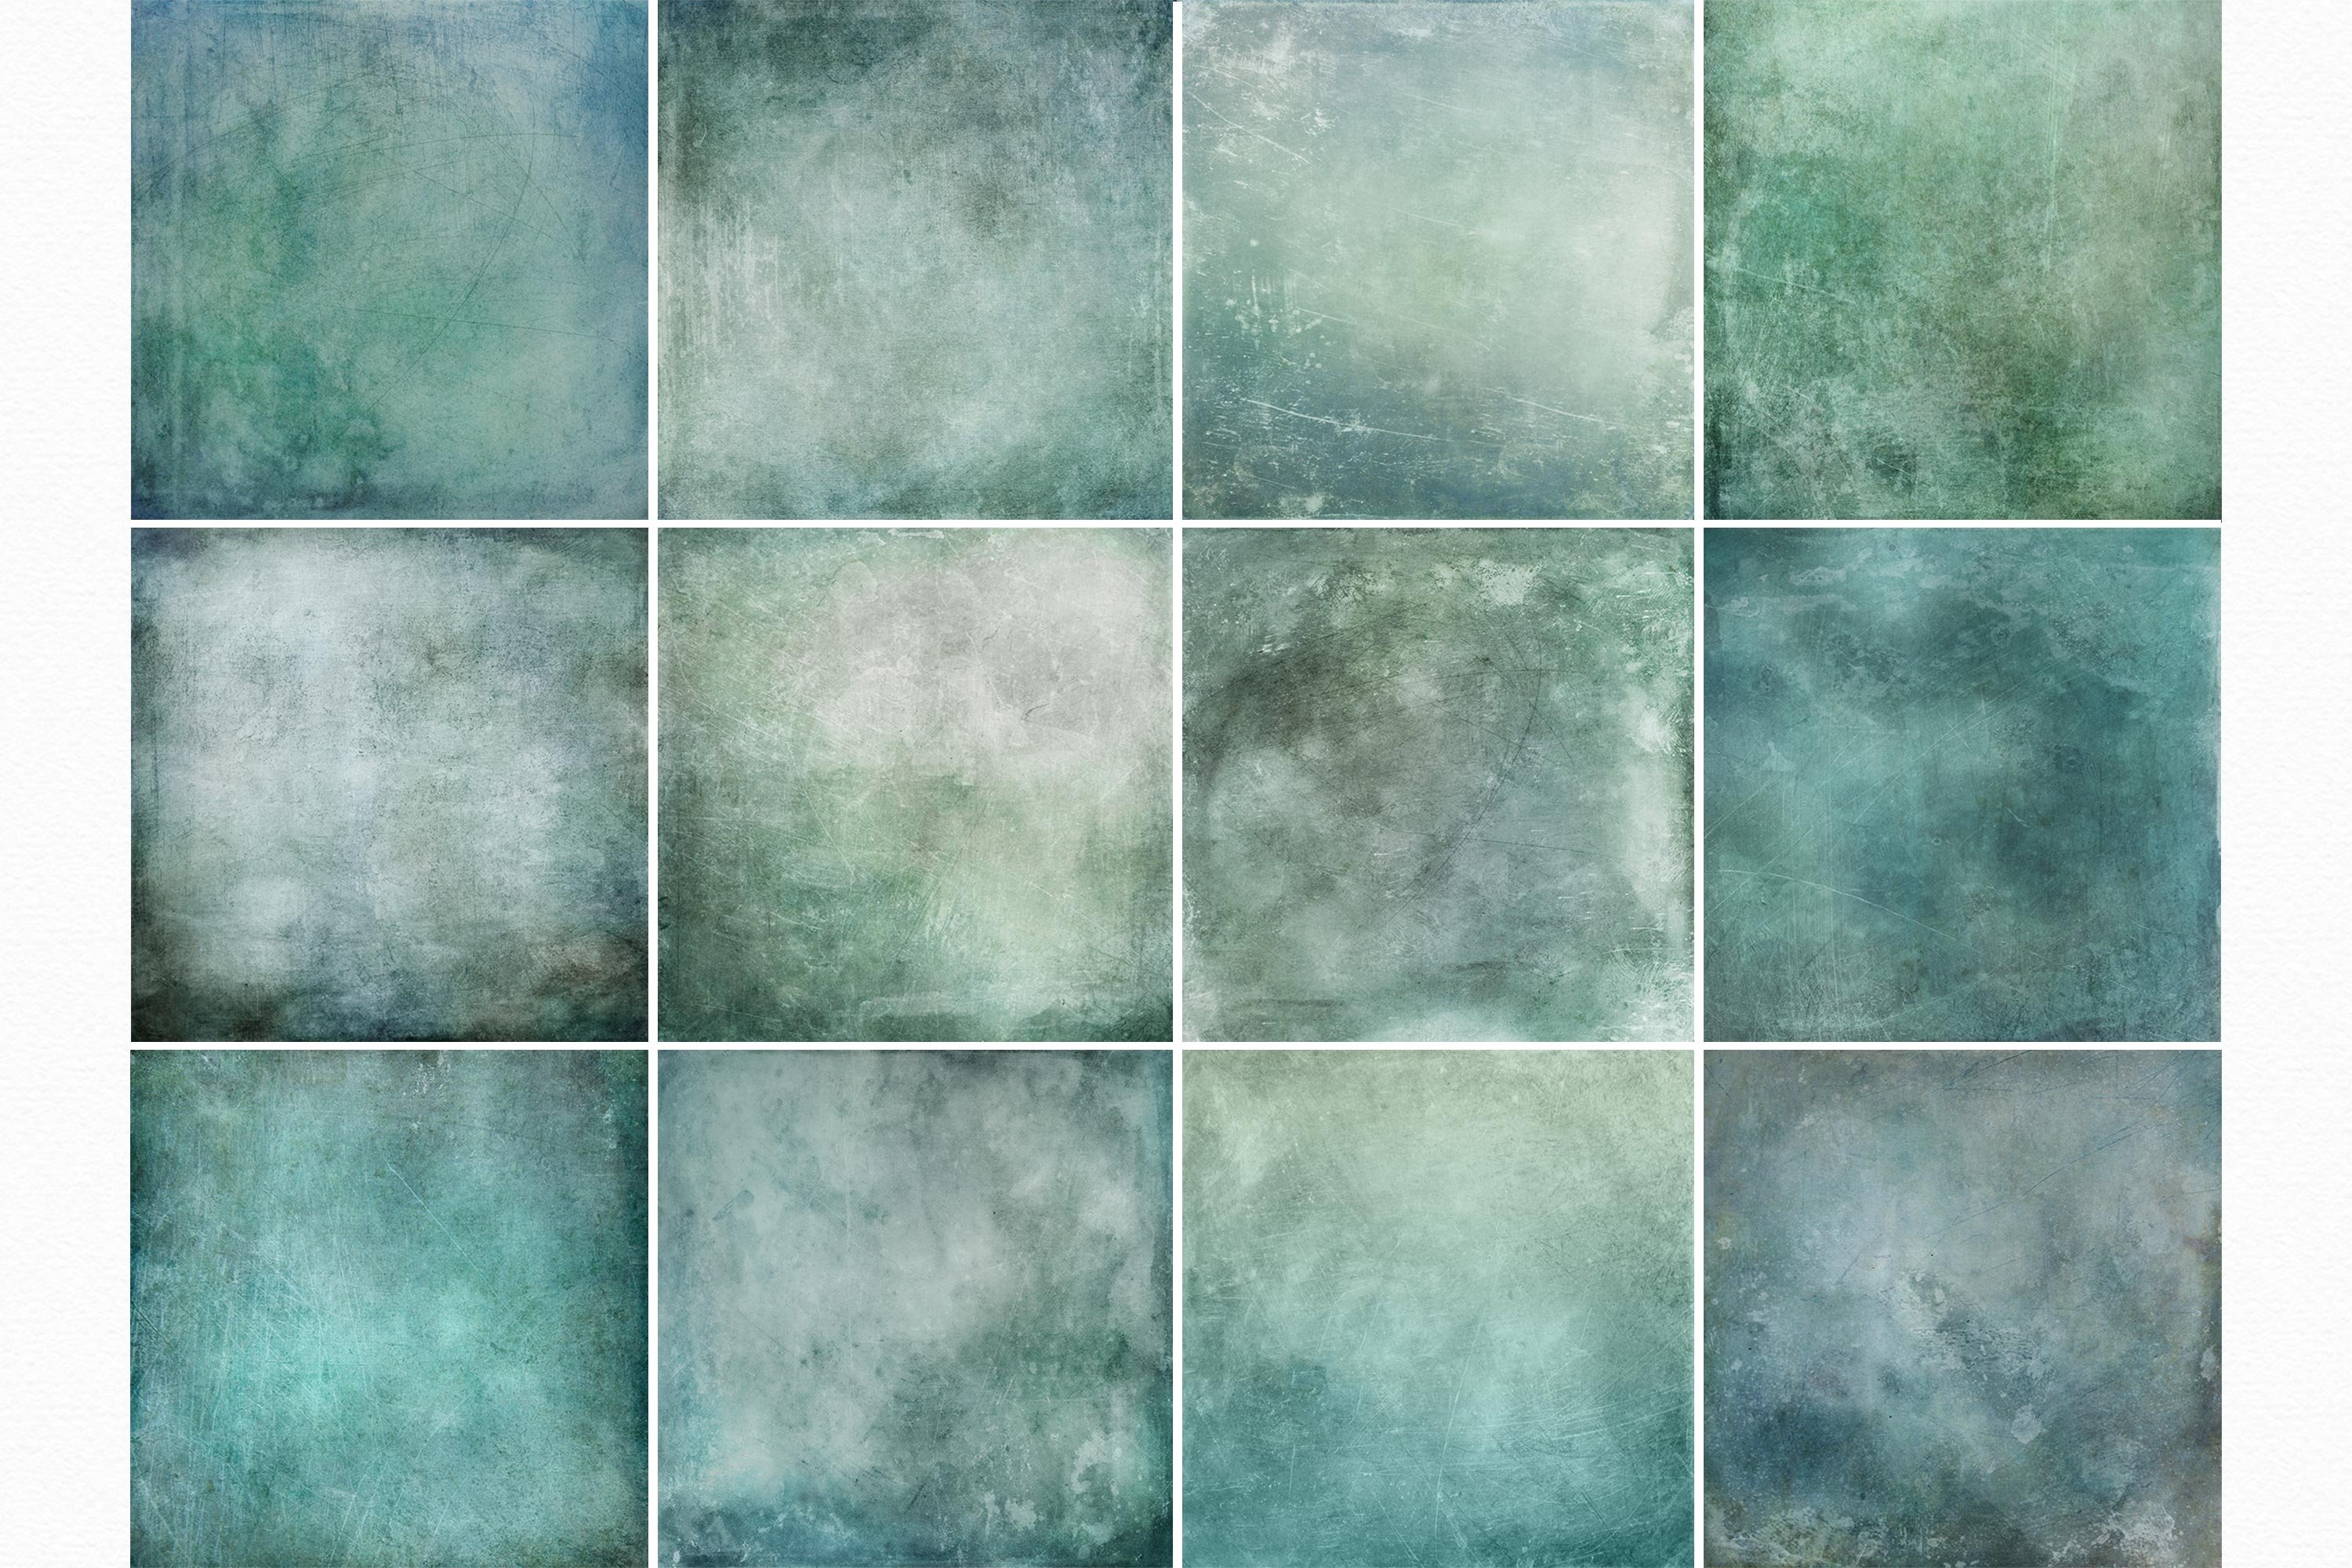 Distressed Sea Glass Textures preview image.